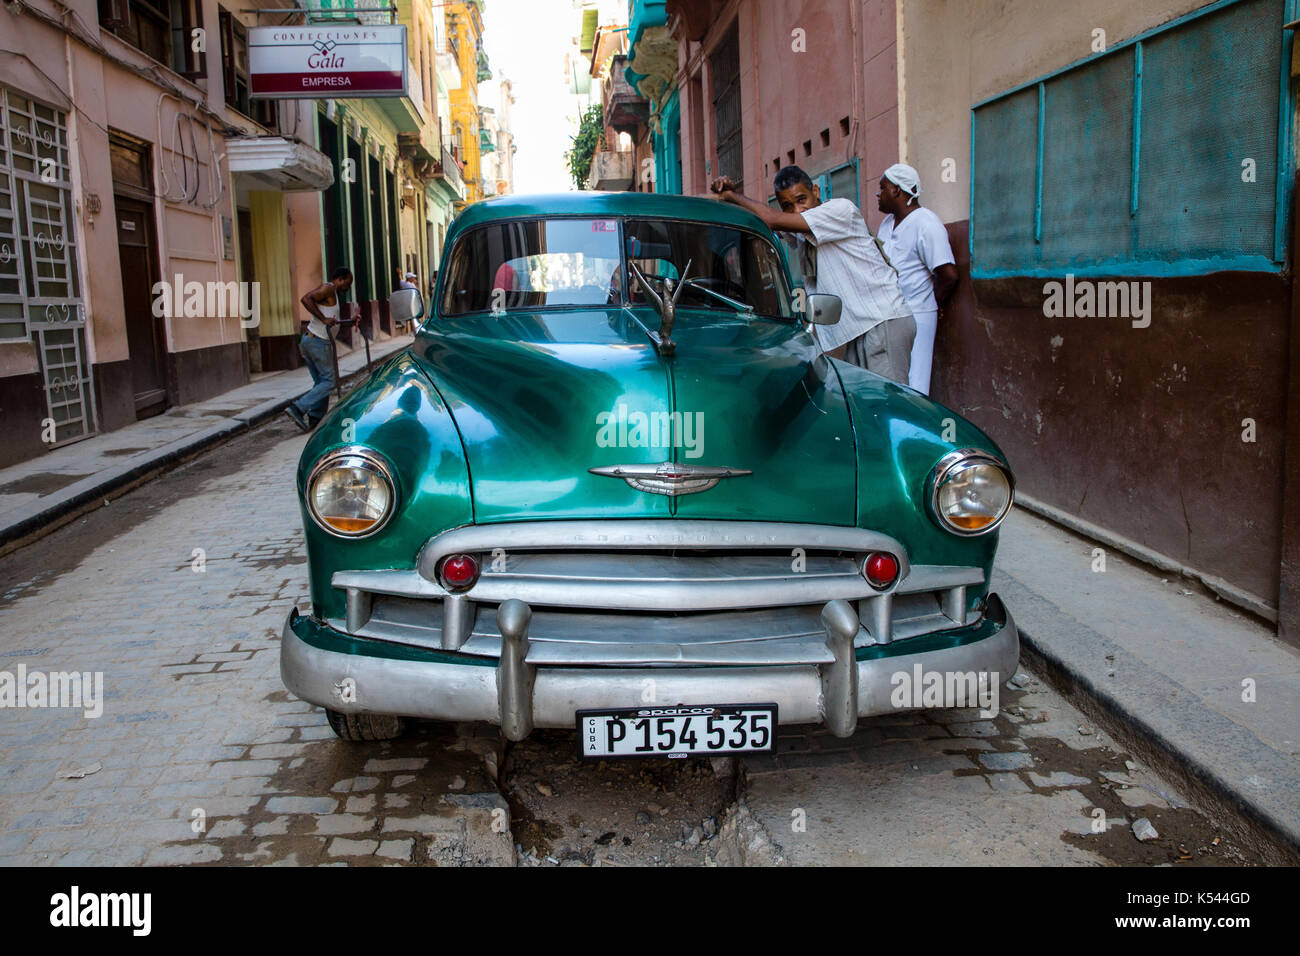 Two men hang out near their 1950 Chevrolet car on a street in the middle of Havana, Cuba in the Caribbean. Stock Photo